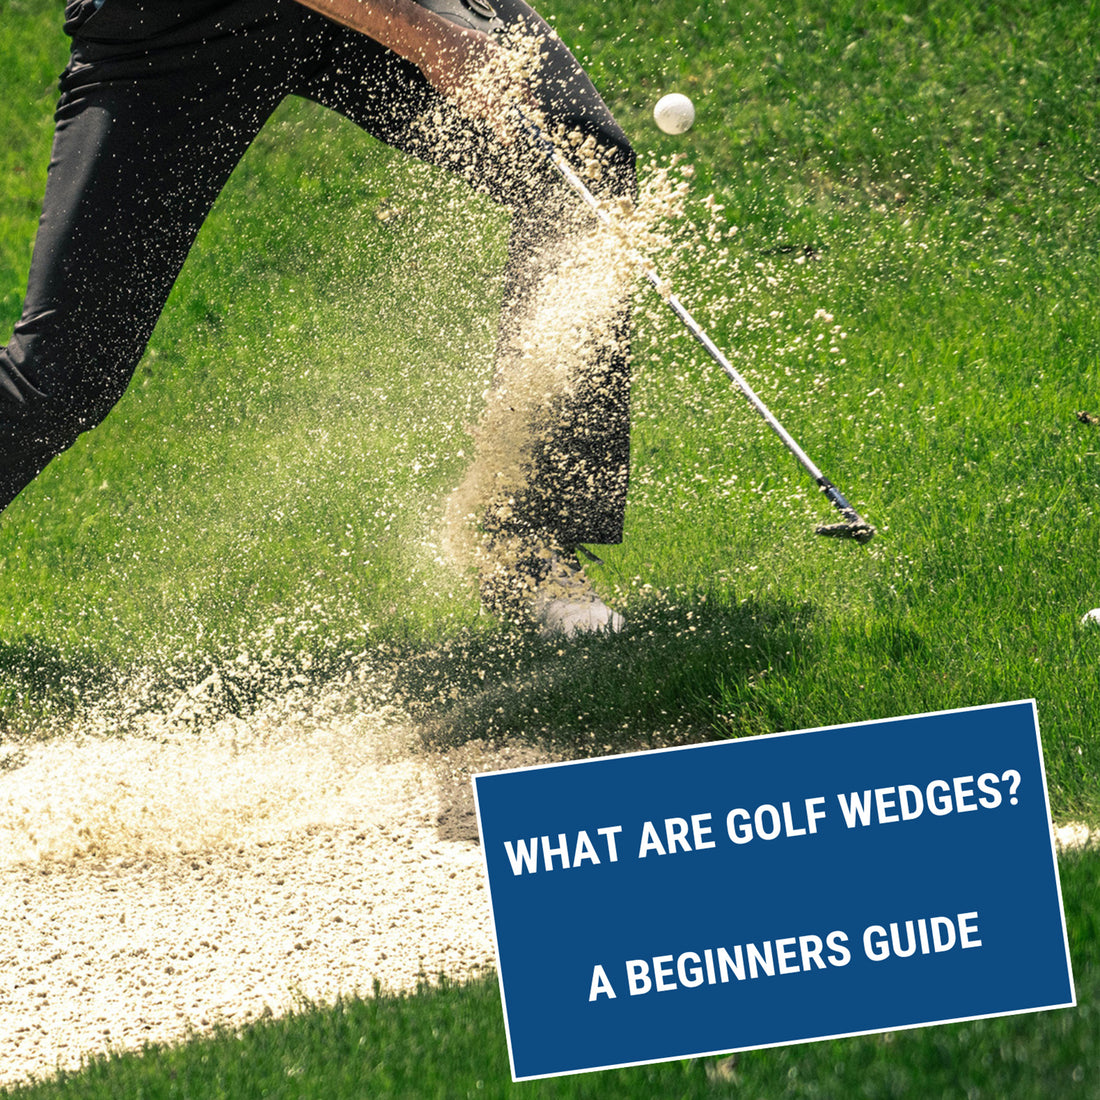 What Are Golf Wedges? A Beginner's Guide